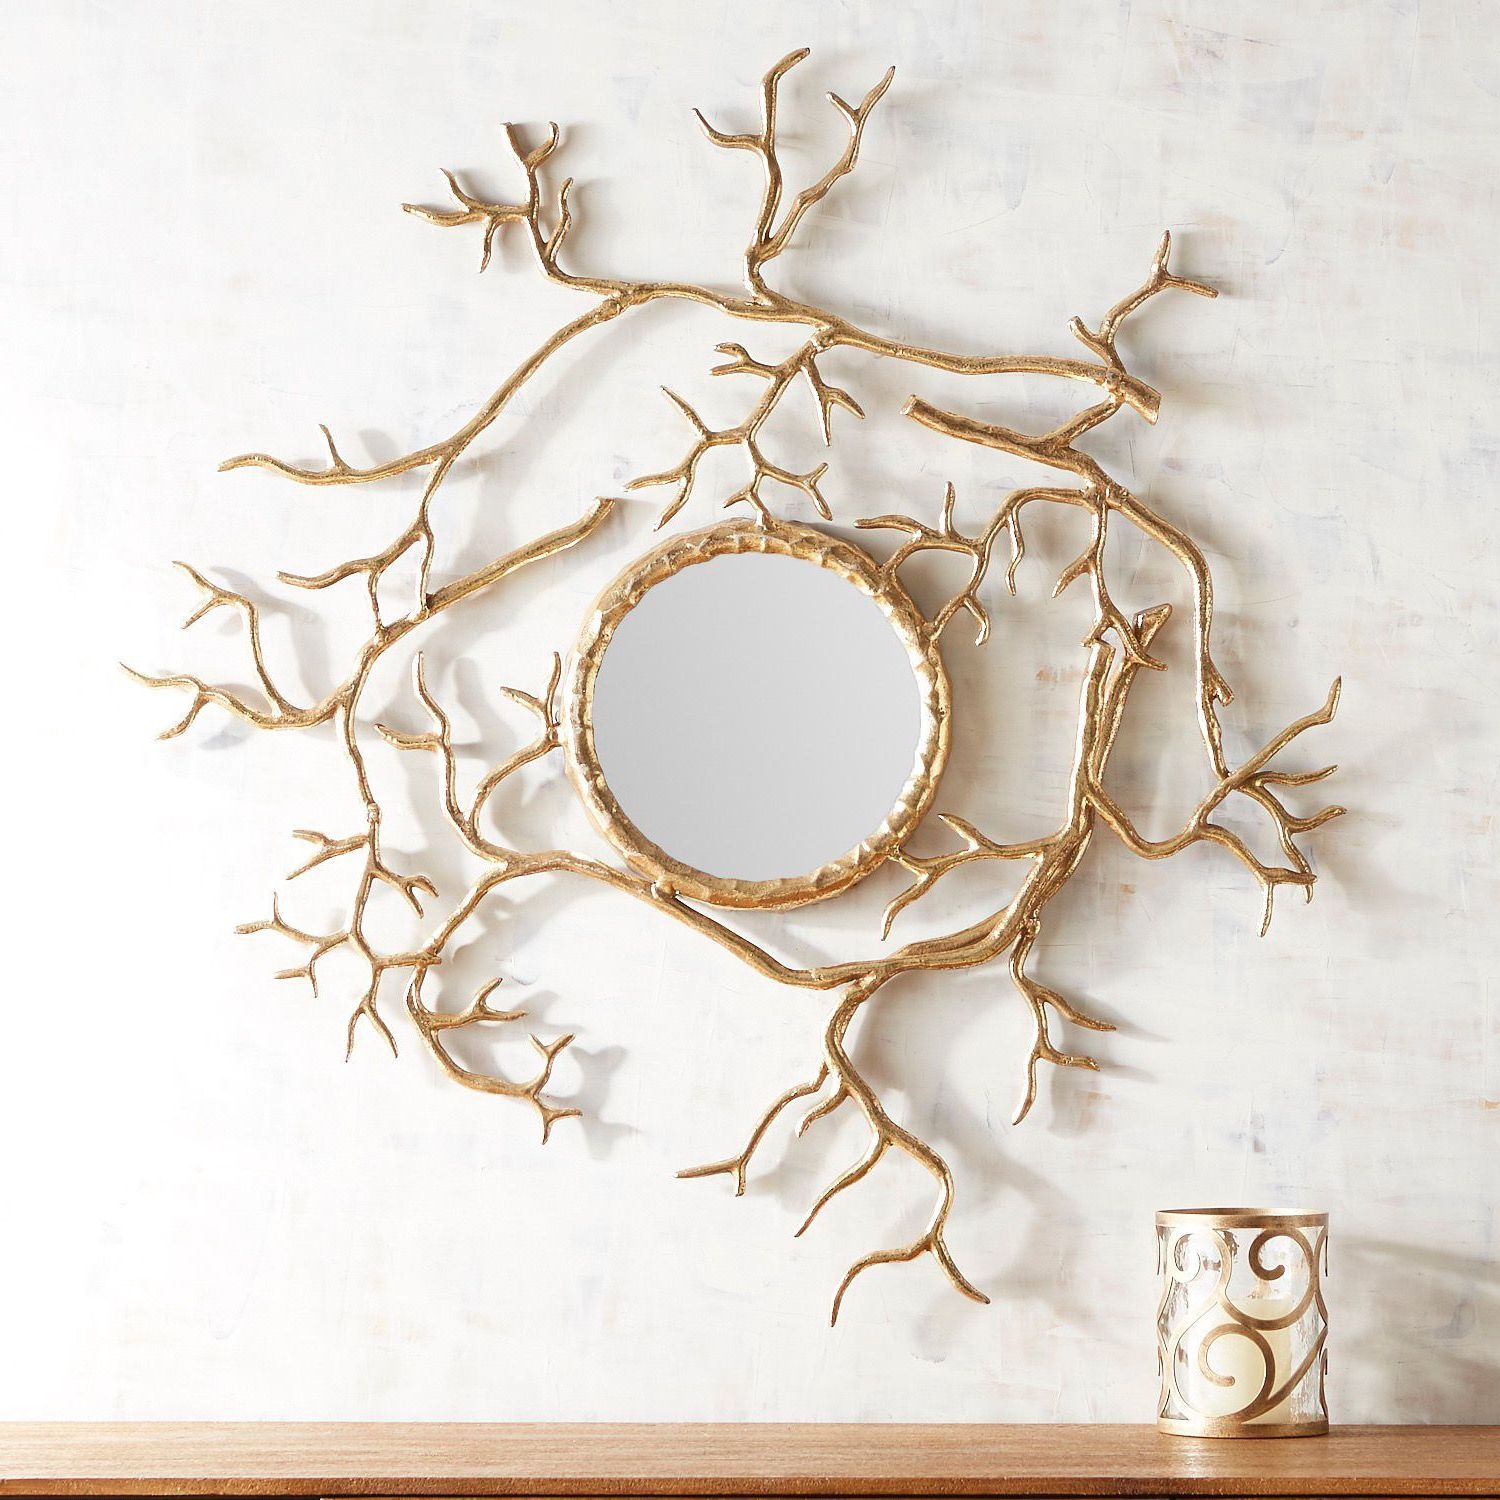 Mirror Crafts, Decor, Branch Intended For Most Up To Date Twisted Sunburst Metal Wall Art (View 14 of 15)